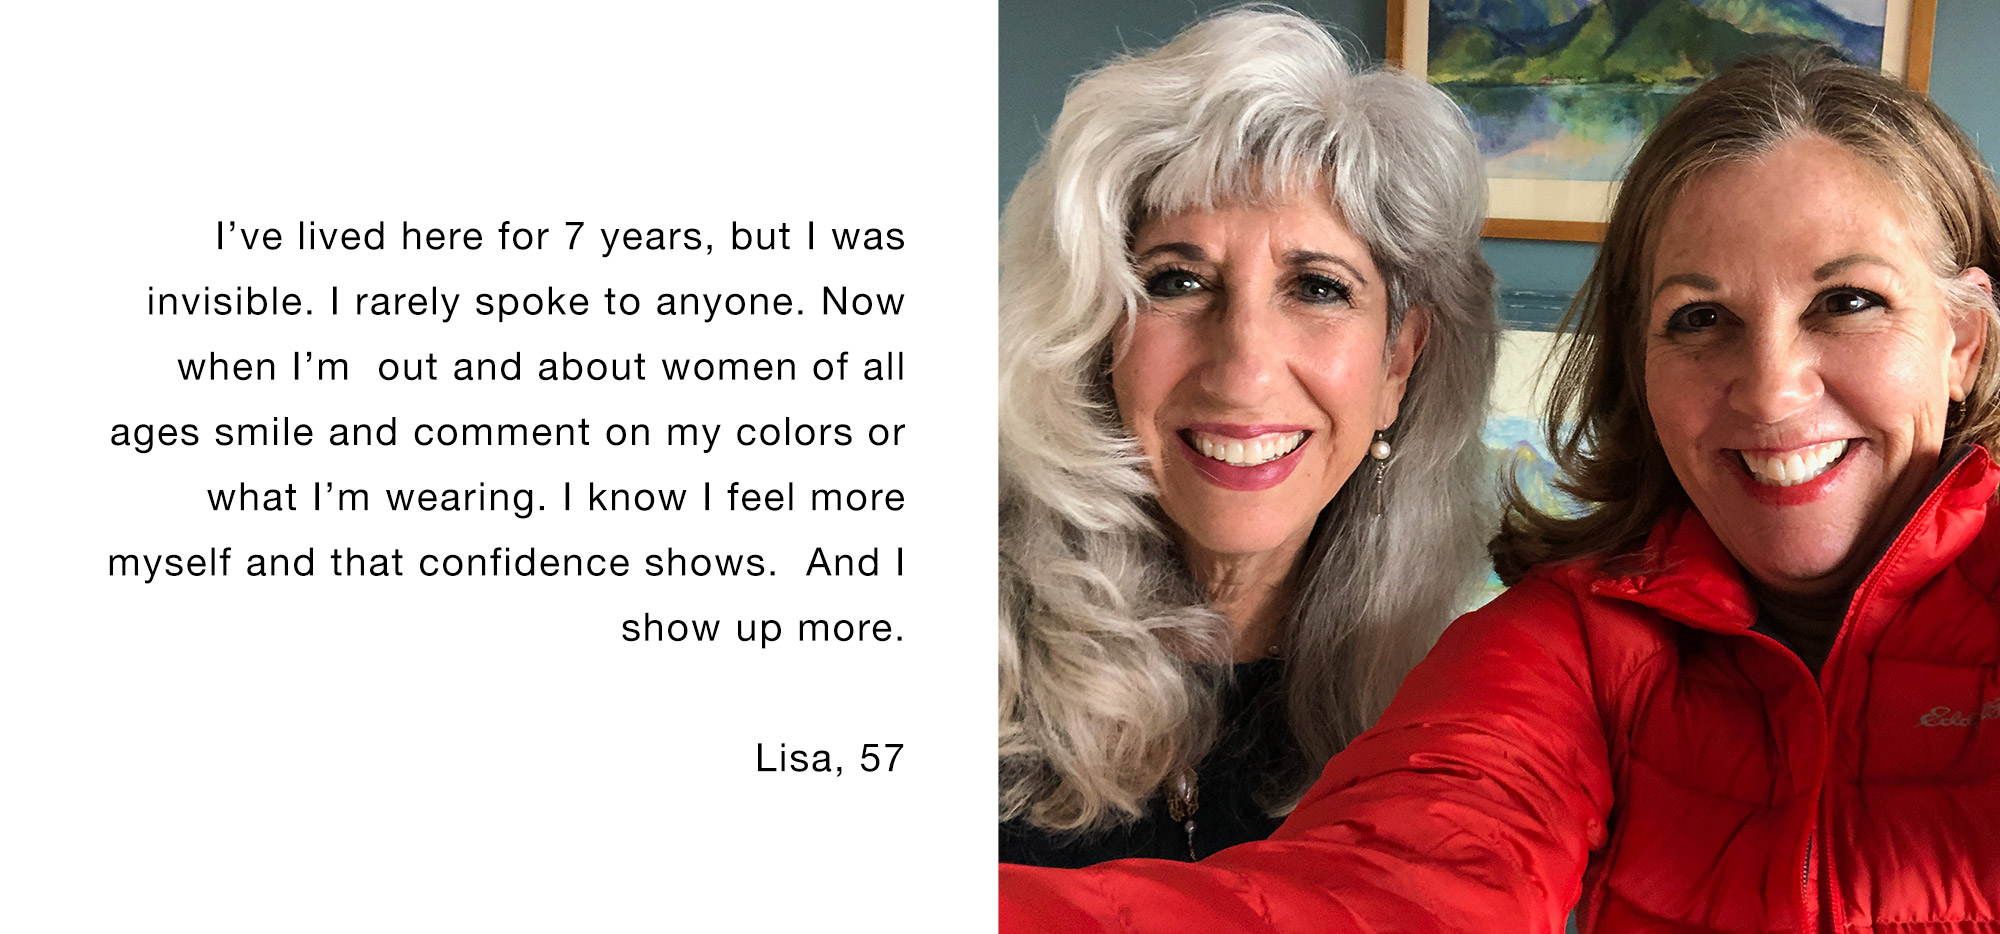 I’ve lived here for 7 years, but I was invisible. I rarely spoke to anyone. Now when I’m out and about women of all ages smile and comment on my colors or what I’m wearing. I know I feel more myself and that confidence shows. And I show up more Lisa, 57